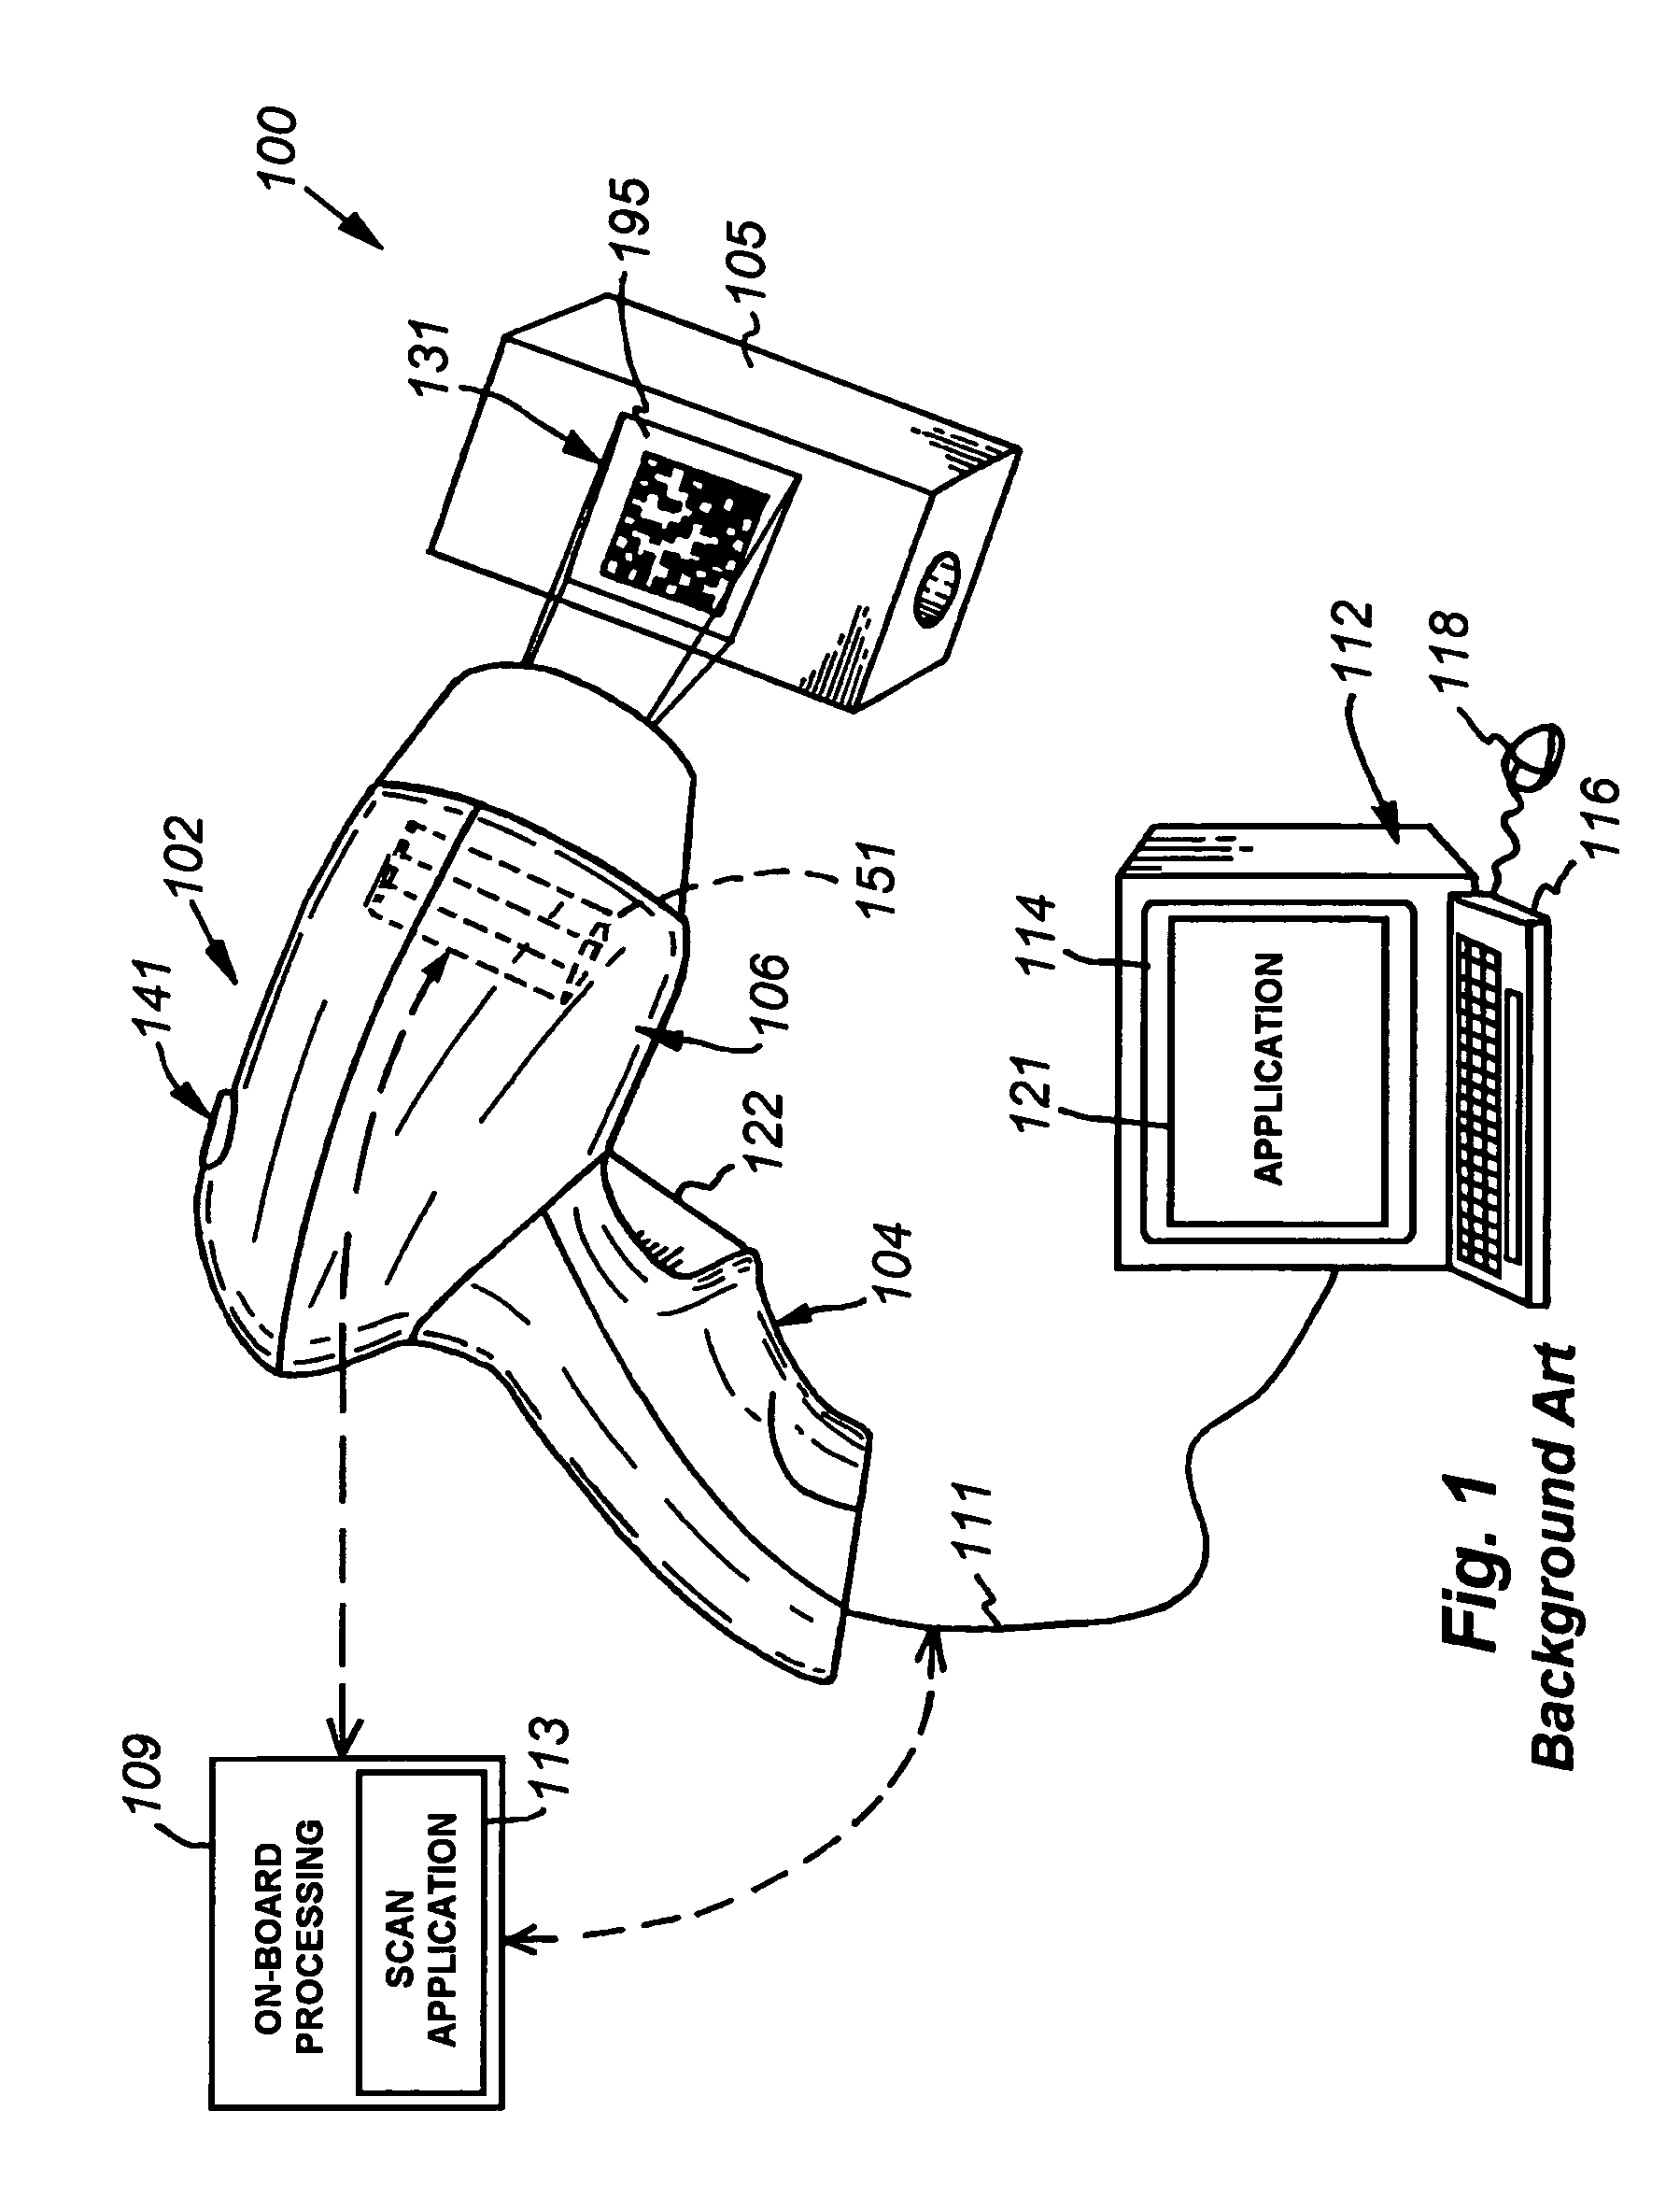 System and method for providing diffuse illumination in a symbology reader